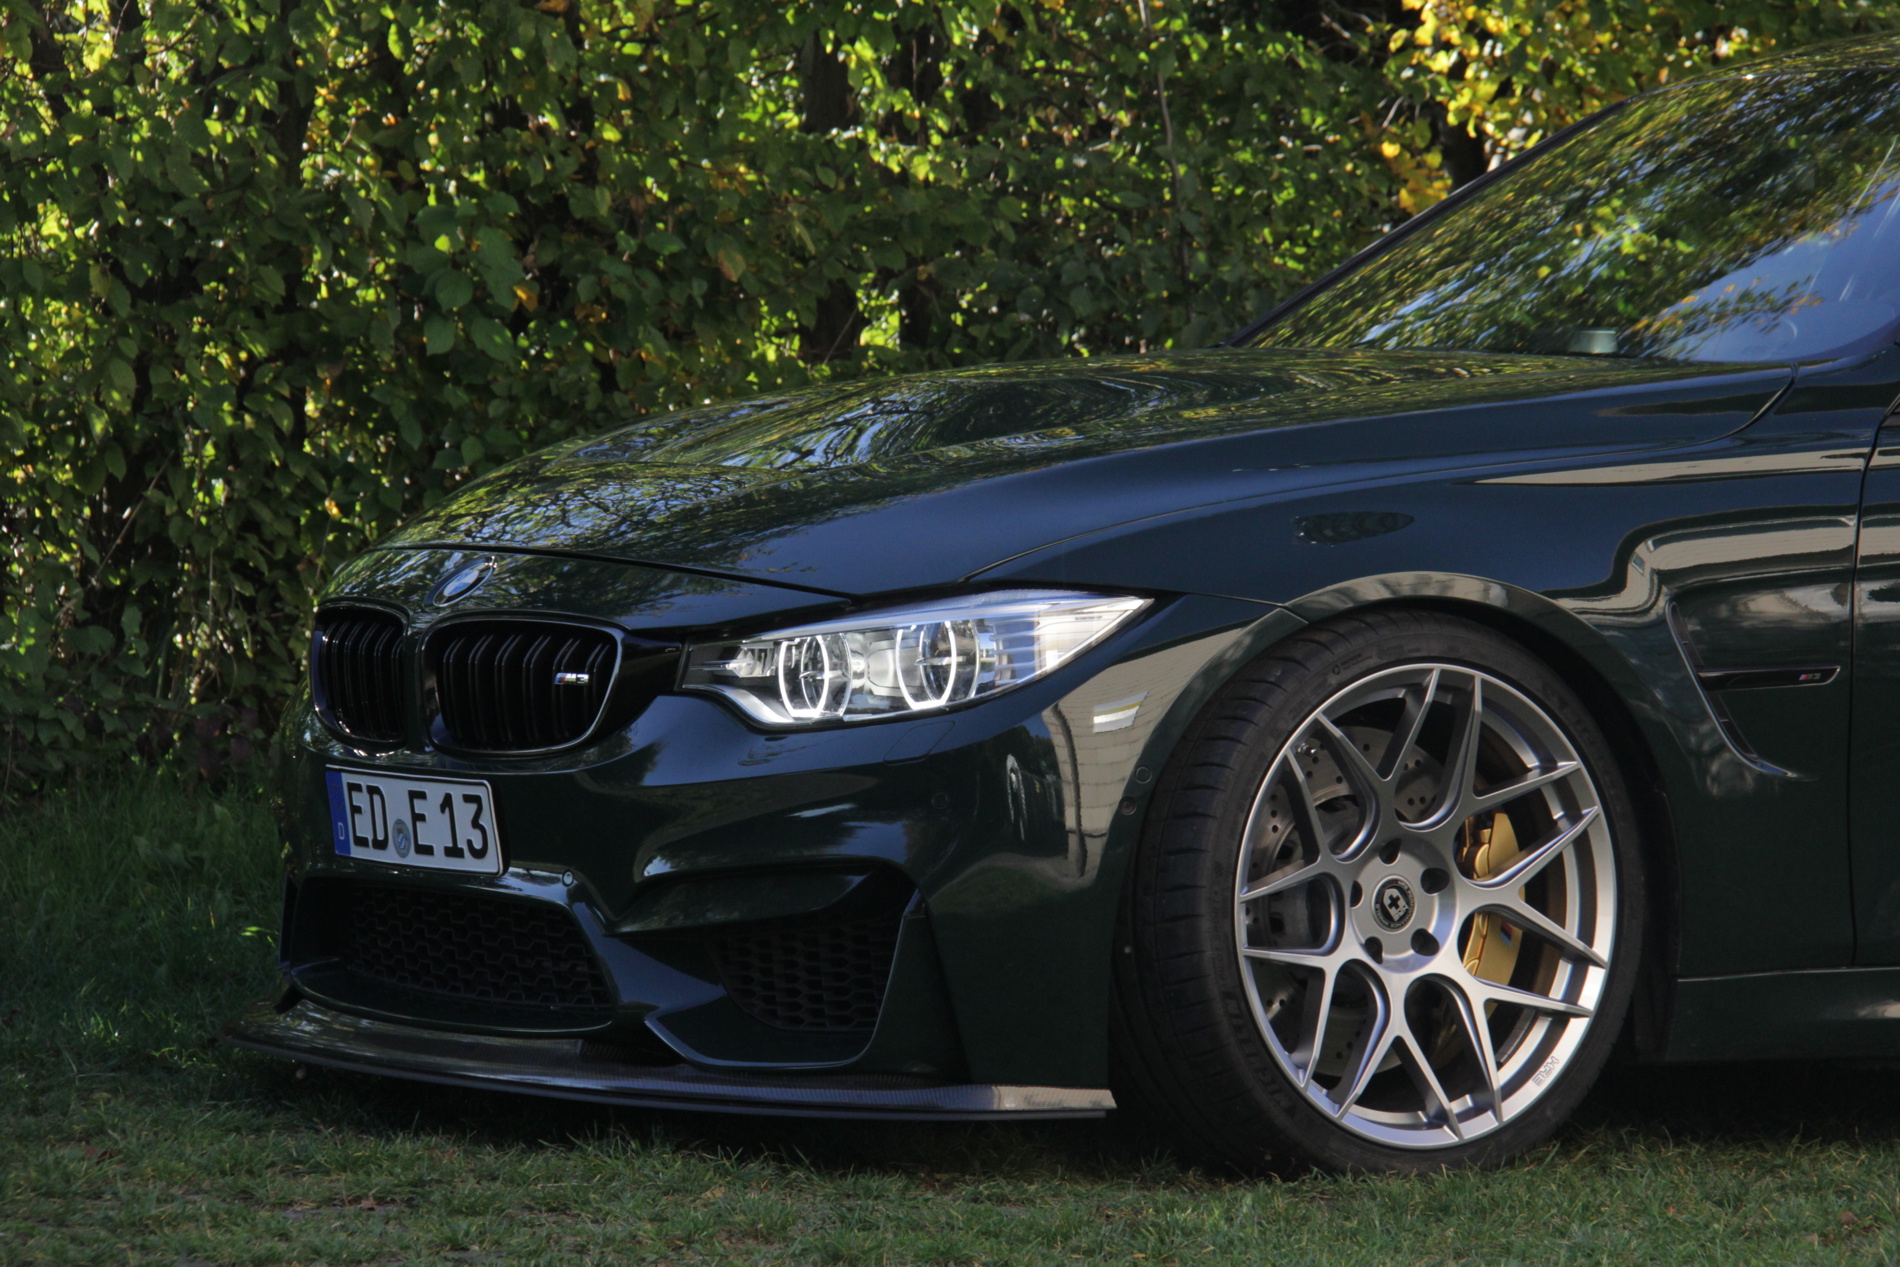 Green BMW M3-GT F80 by Laptime-Performance